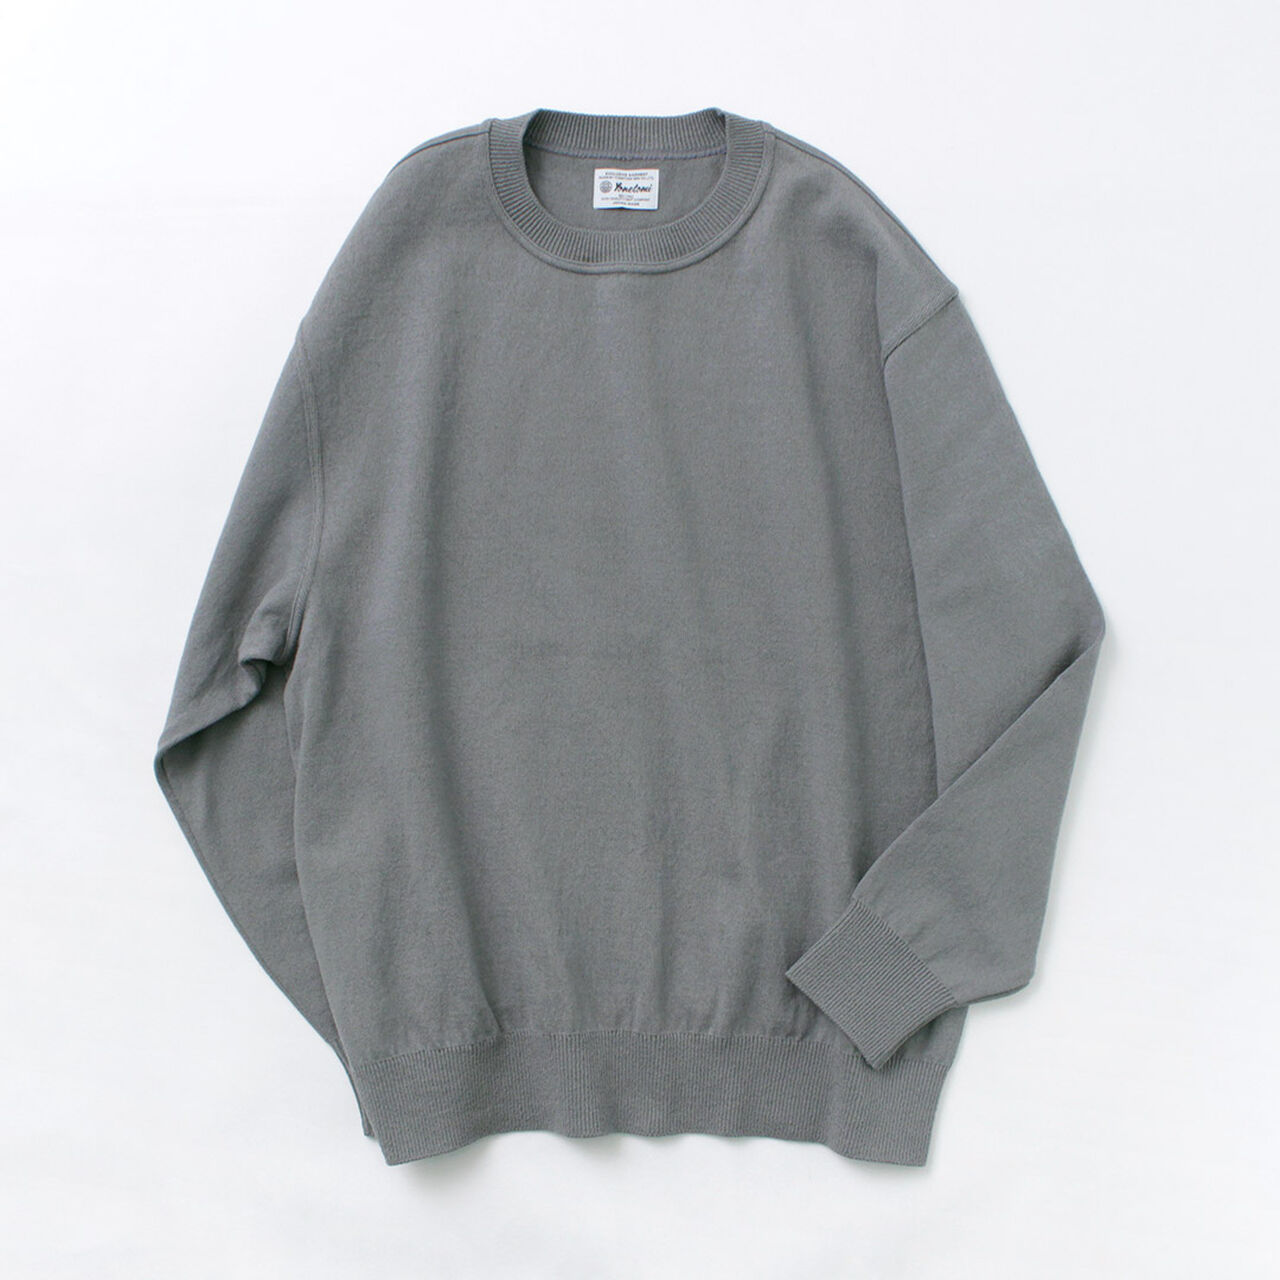 YONETOMI NEW BASIC Color Special Order Wave Cotton Knit Pullover